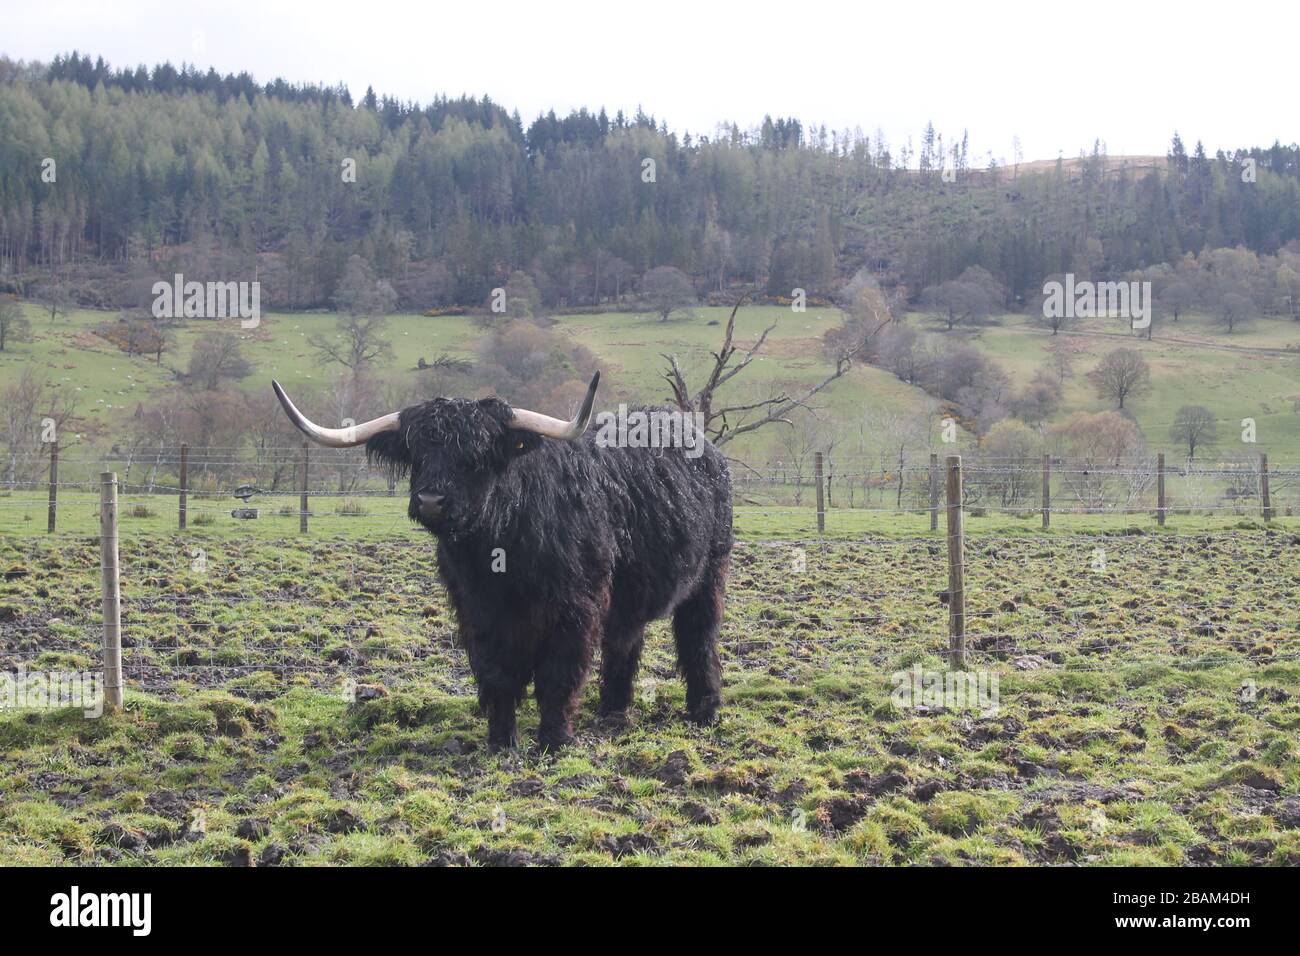 Longhorn cattle living in the fields Stock Photo